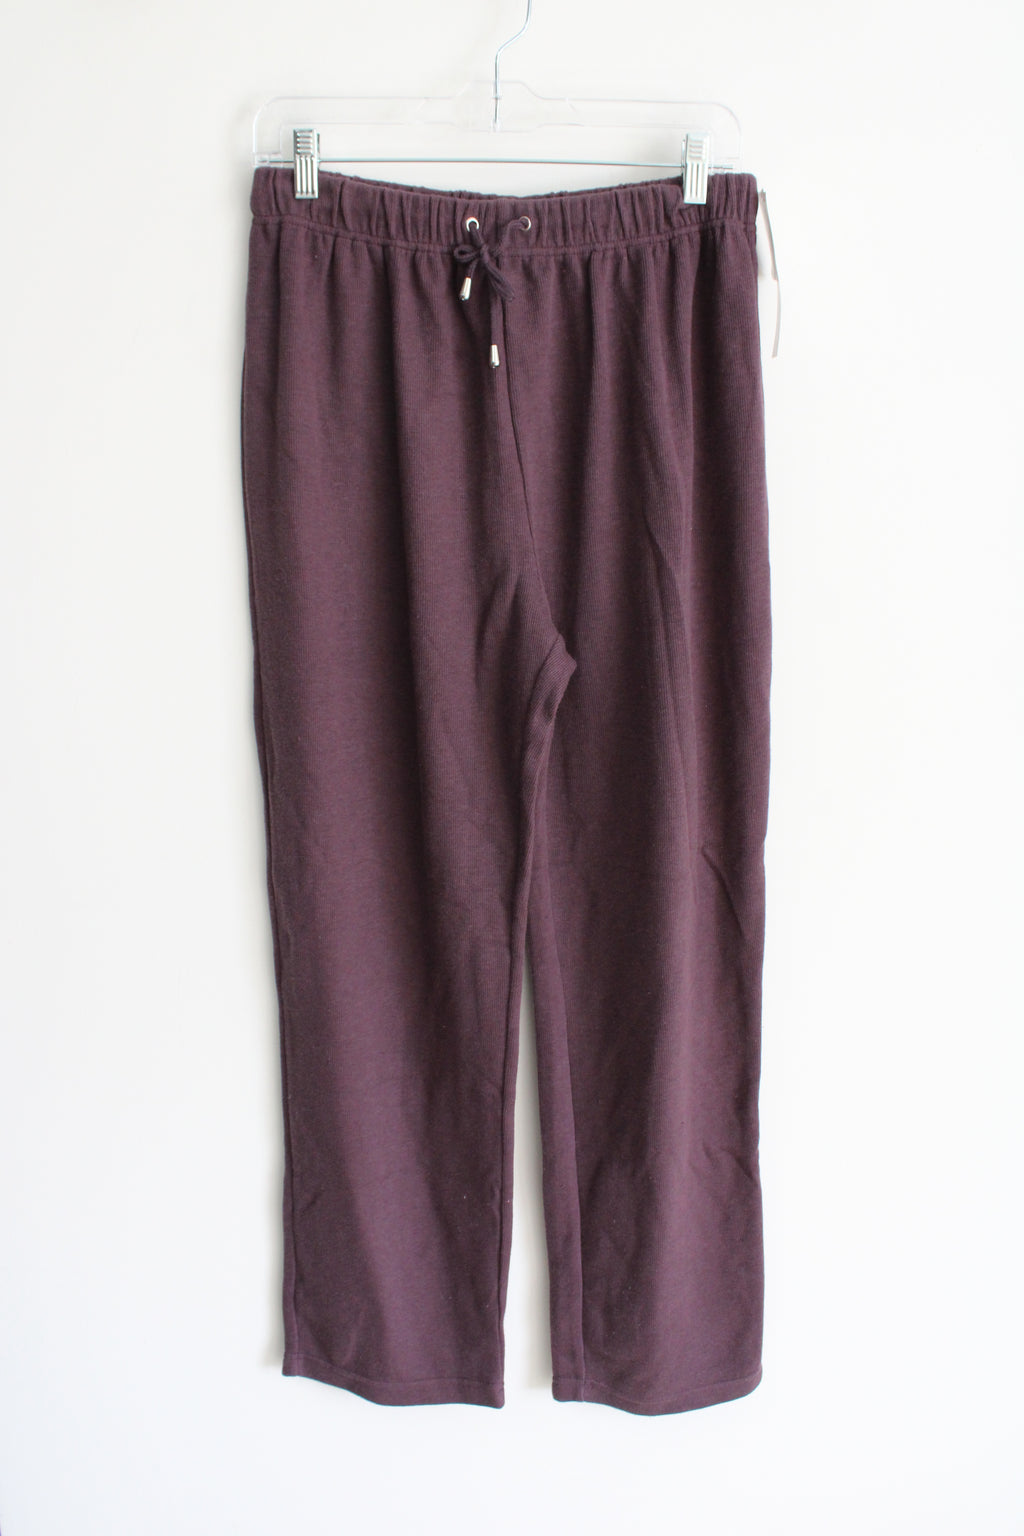 NEW Hasting & Smith Purple Knit Pants | M